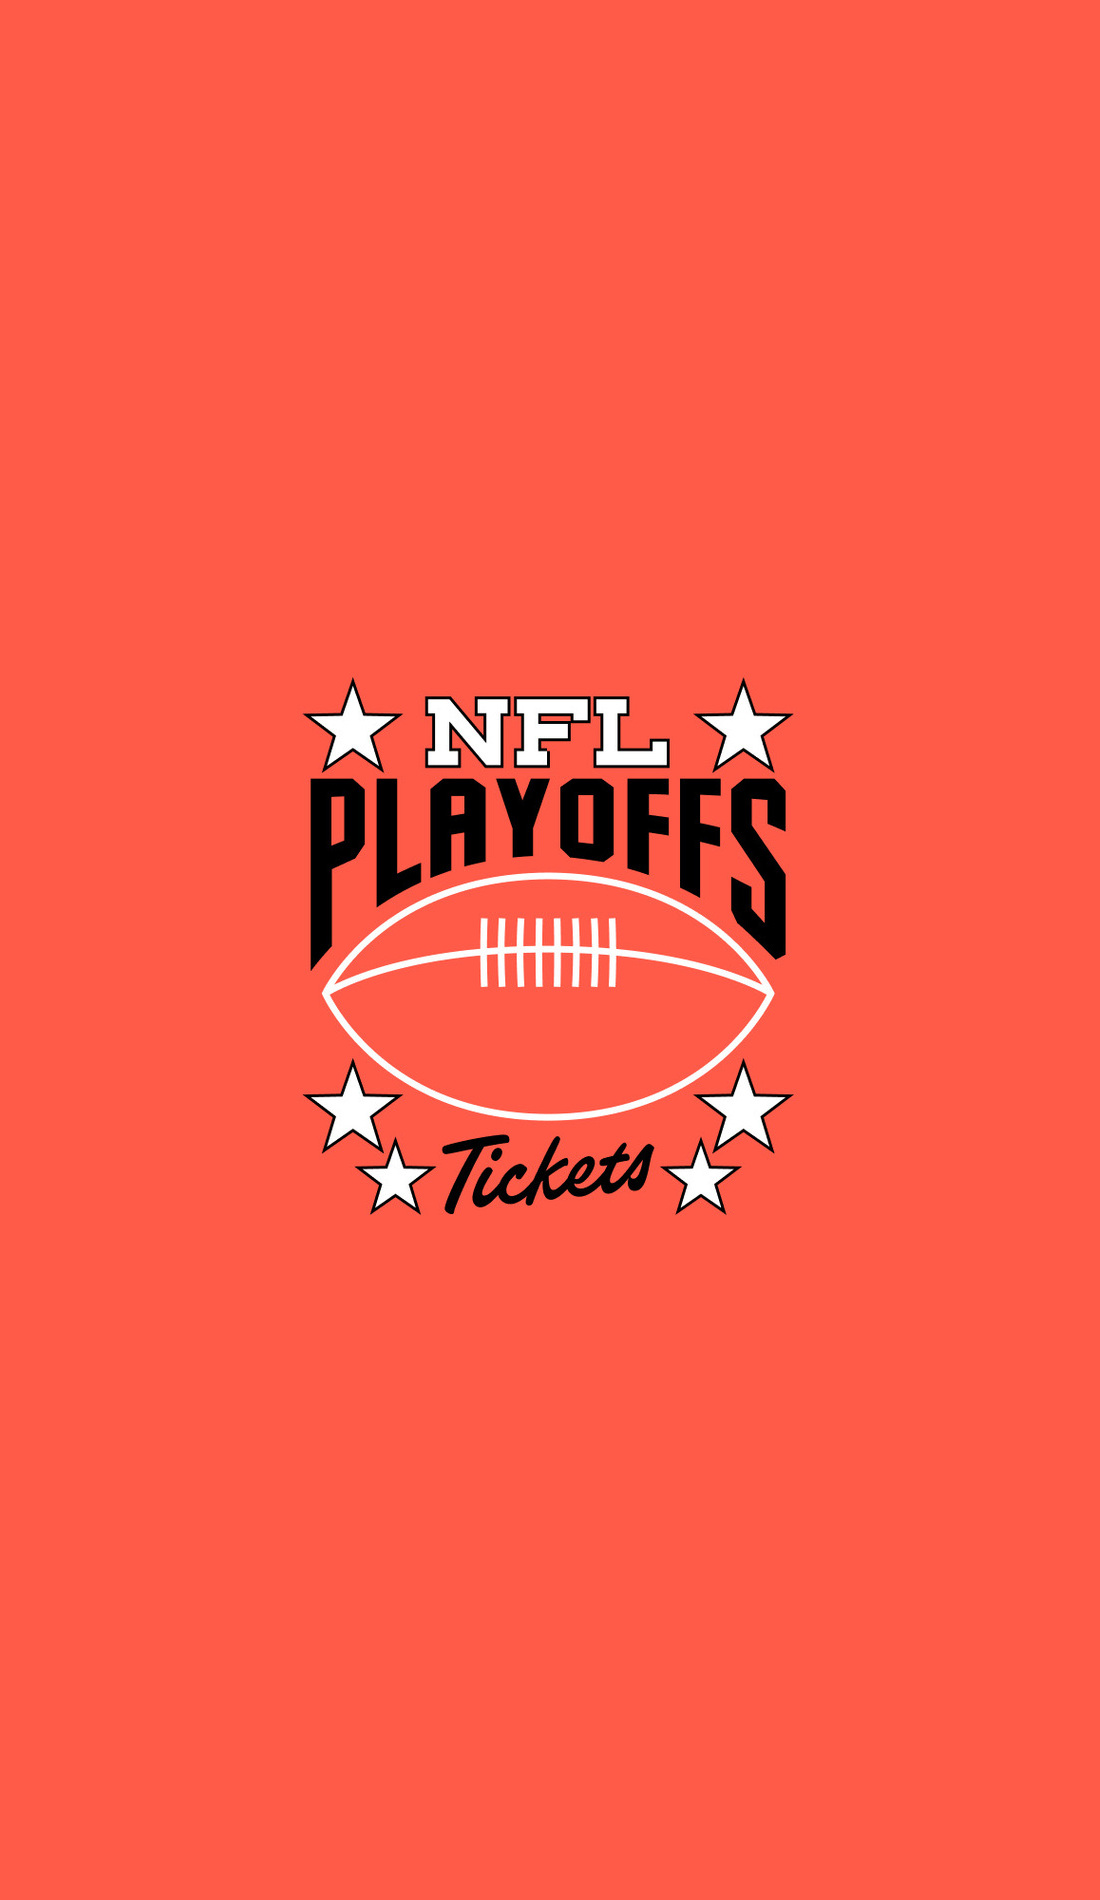 A AFC Divisional Round live event